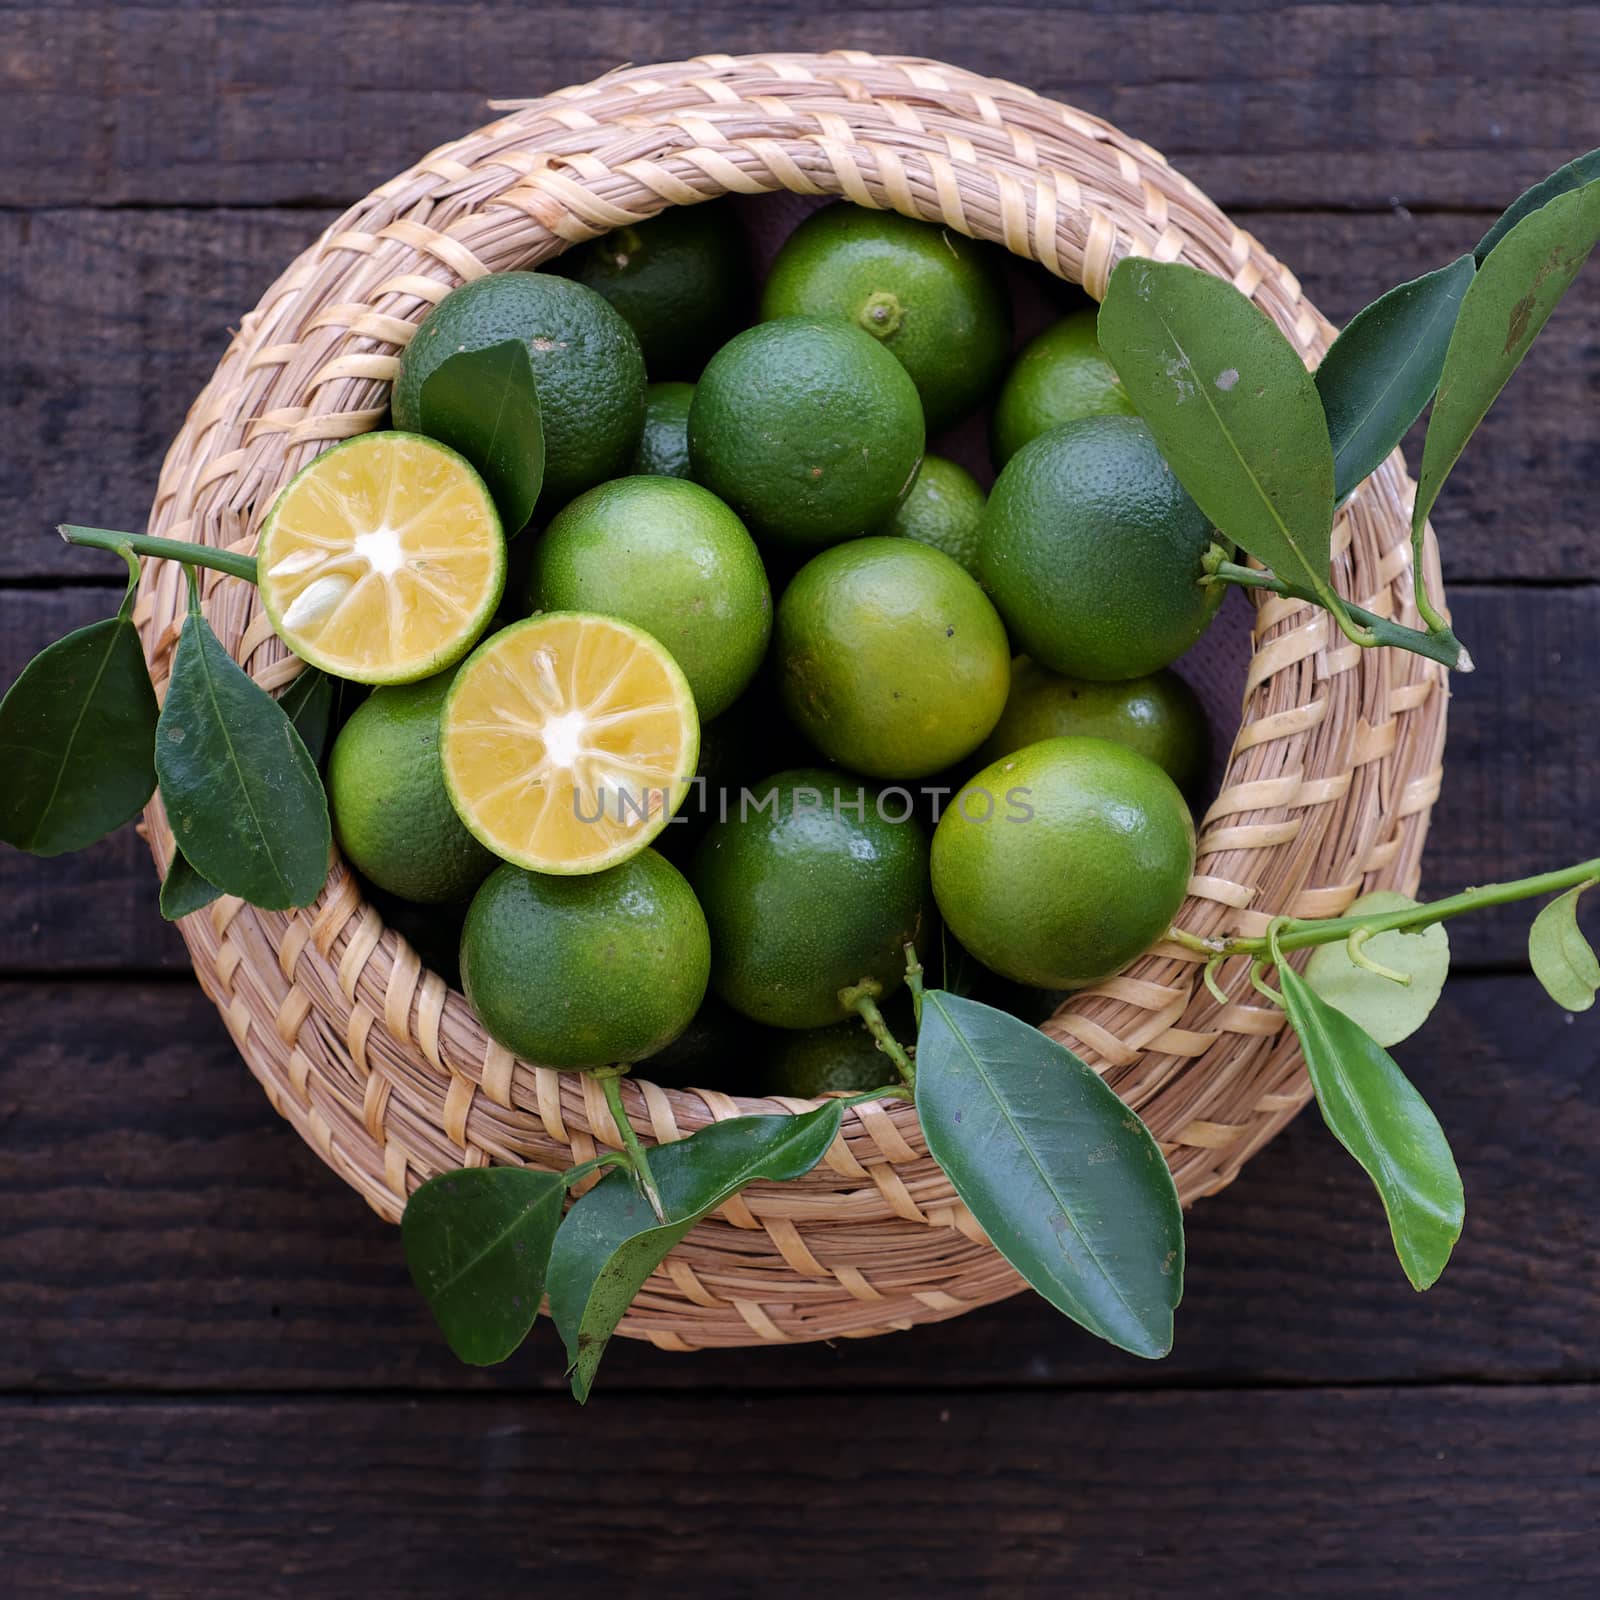 Green Kumquat fruit on wooden background, a popular agriculture product of Vietnam, rich vitamin c, healthy fruit